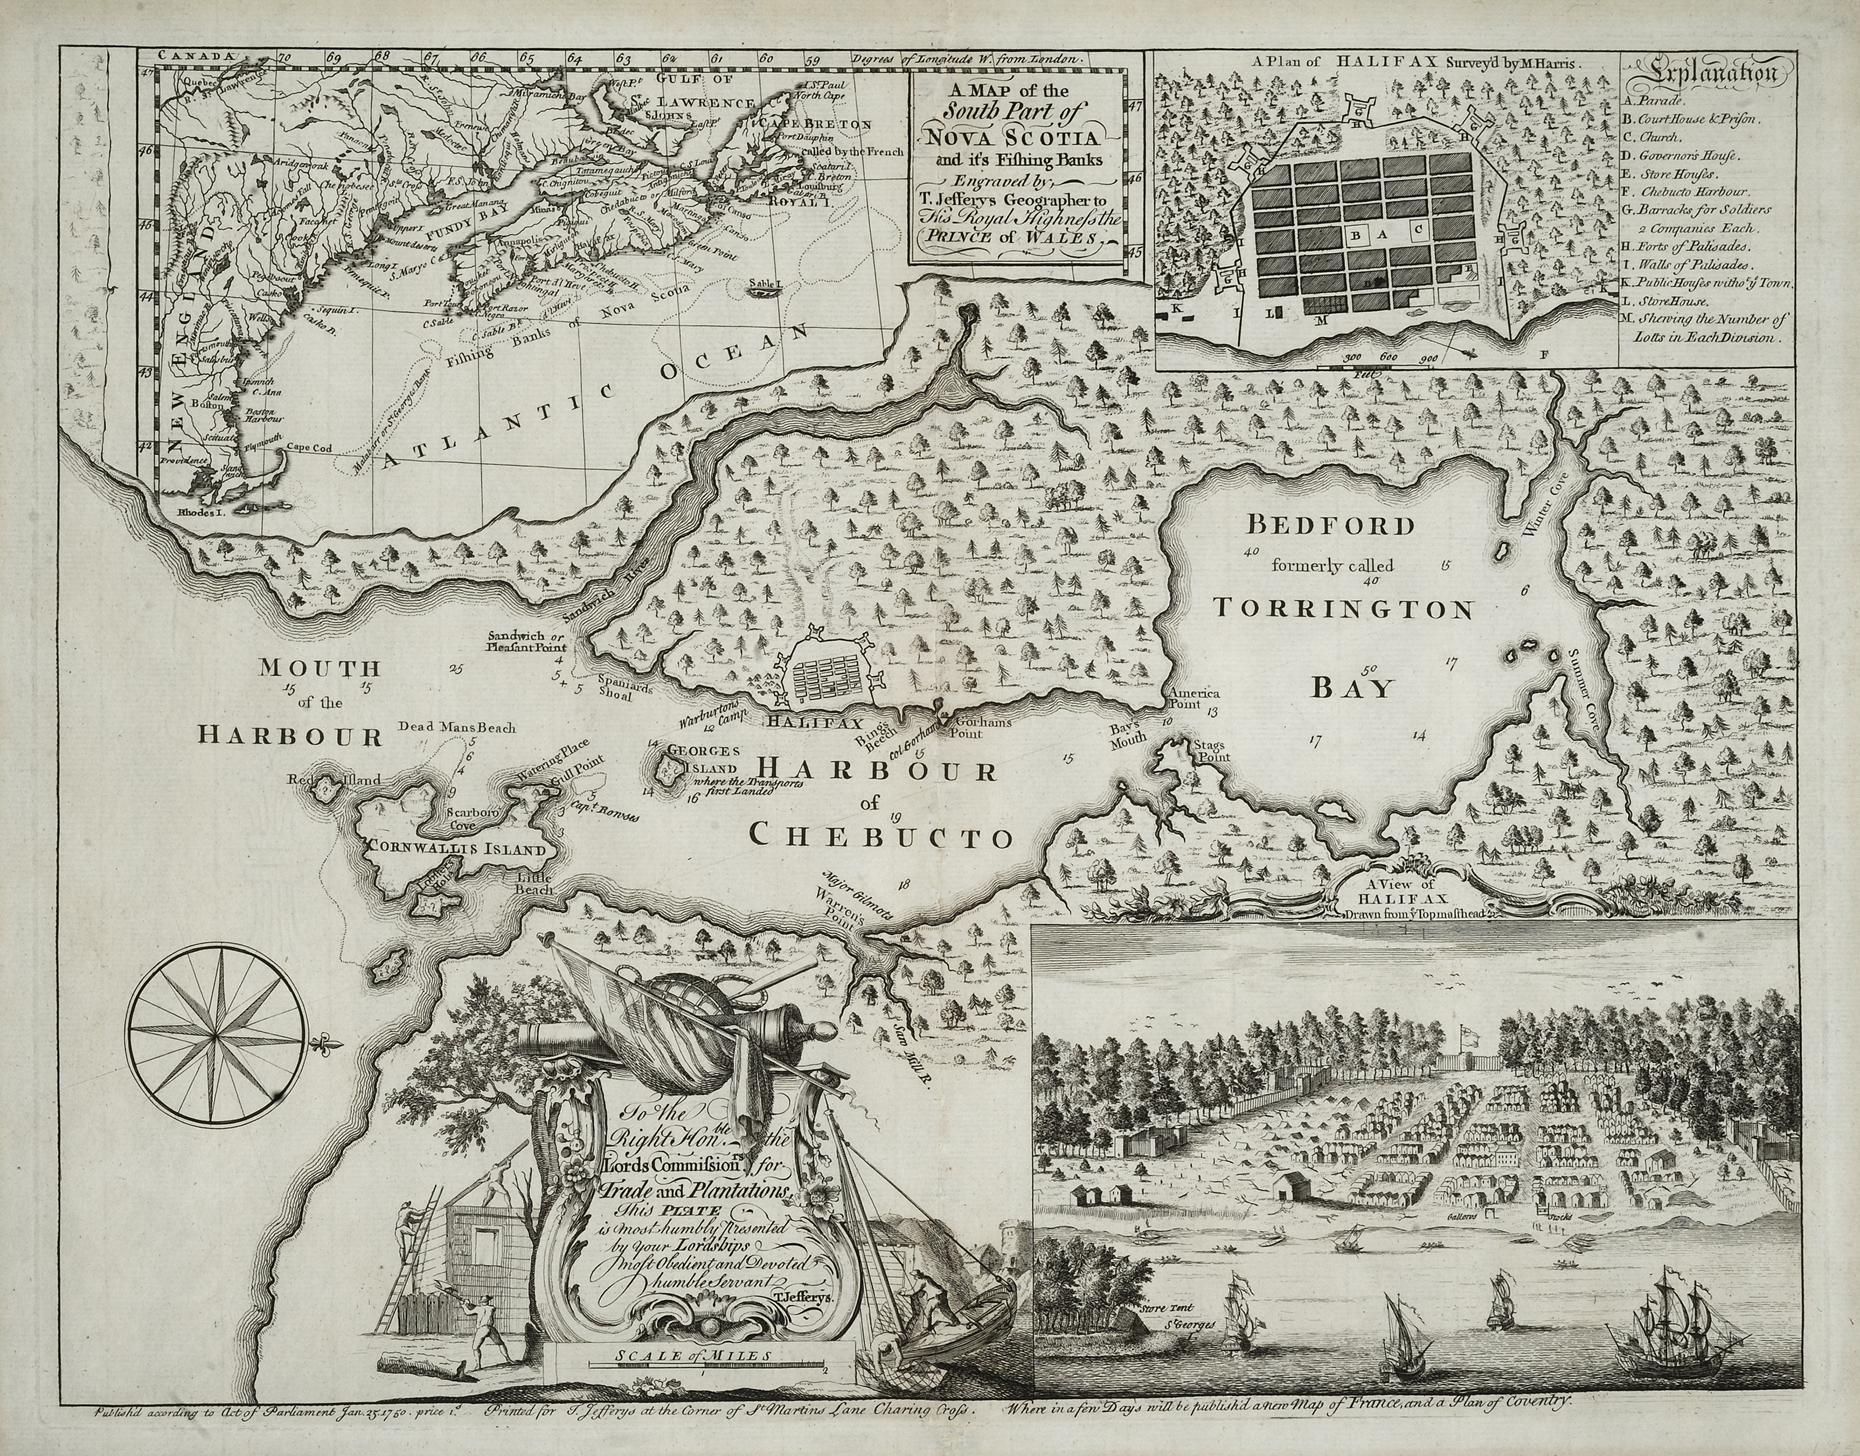 A Map of the South Part of Nova Scotia and its Fishing Banks, Thomas Jefferys, London: Printed for T. Jefferys, 1750